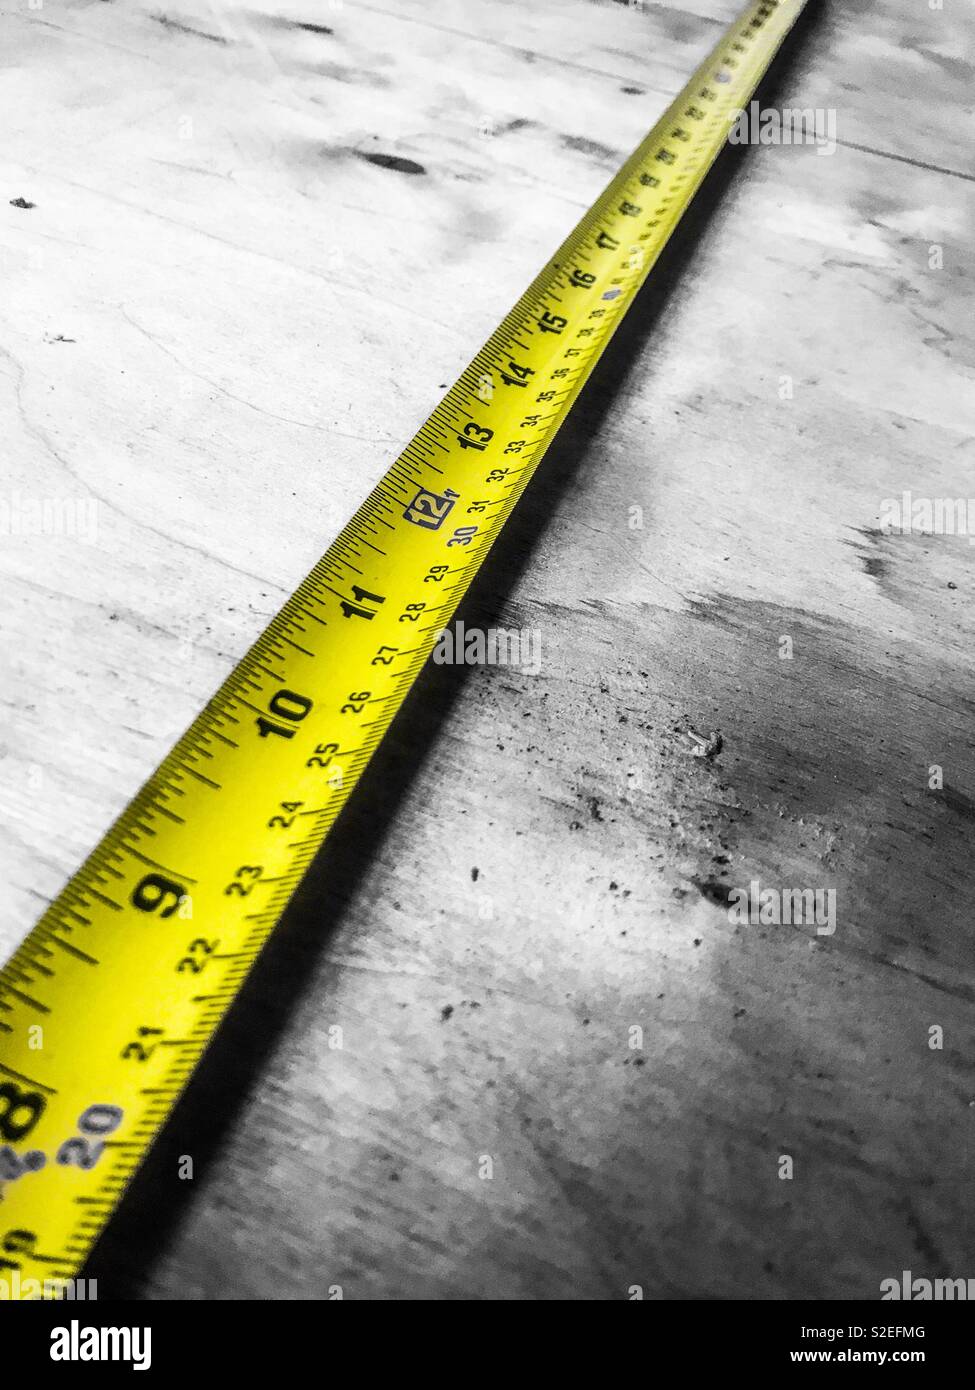 https://c8.alamy.com/comp/S2EFMG/tape-measure-on-a-sheet-of-wood-board-with-selective-colour-S2EFMG.jpg